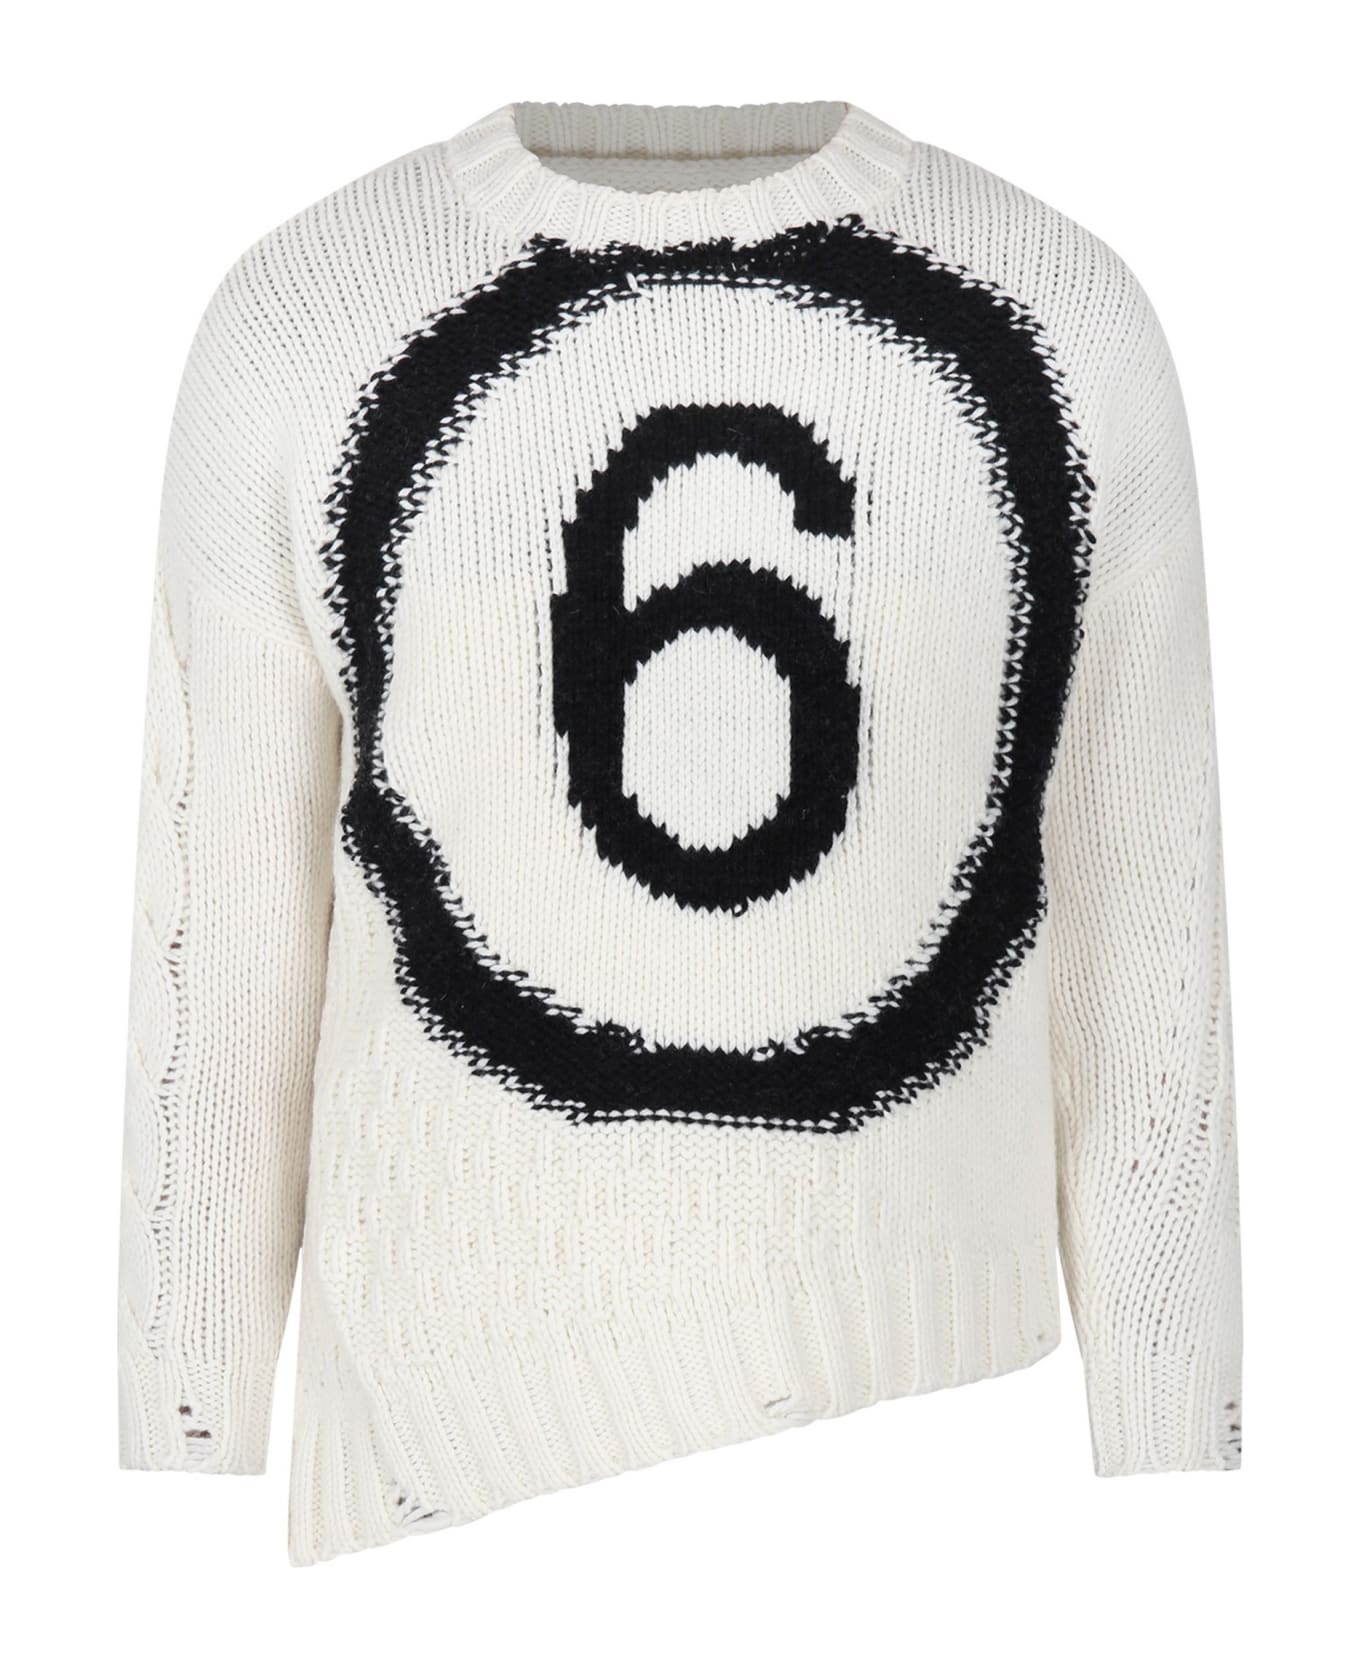 MM6 Maison Margiela White Sweater For Kids With Logo - M6101